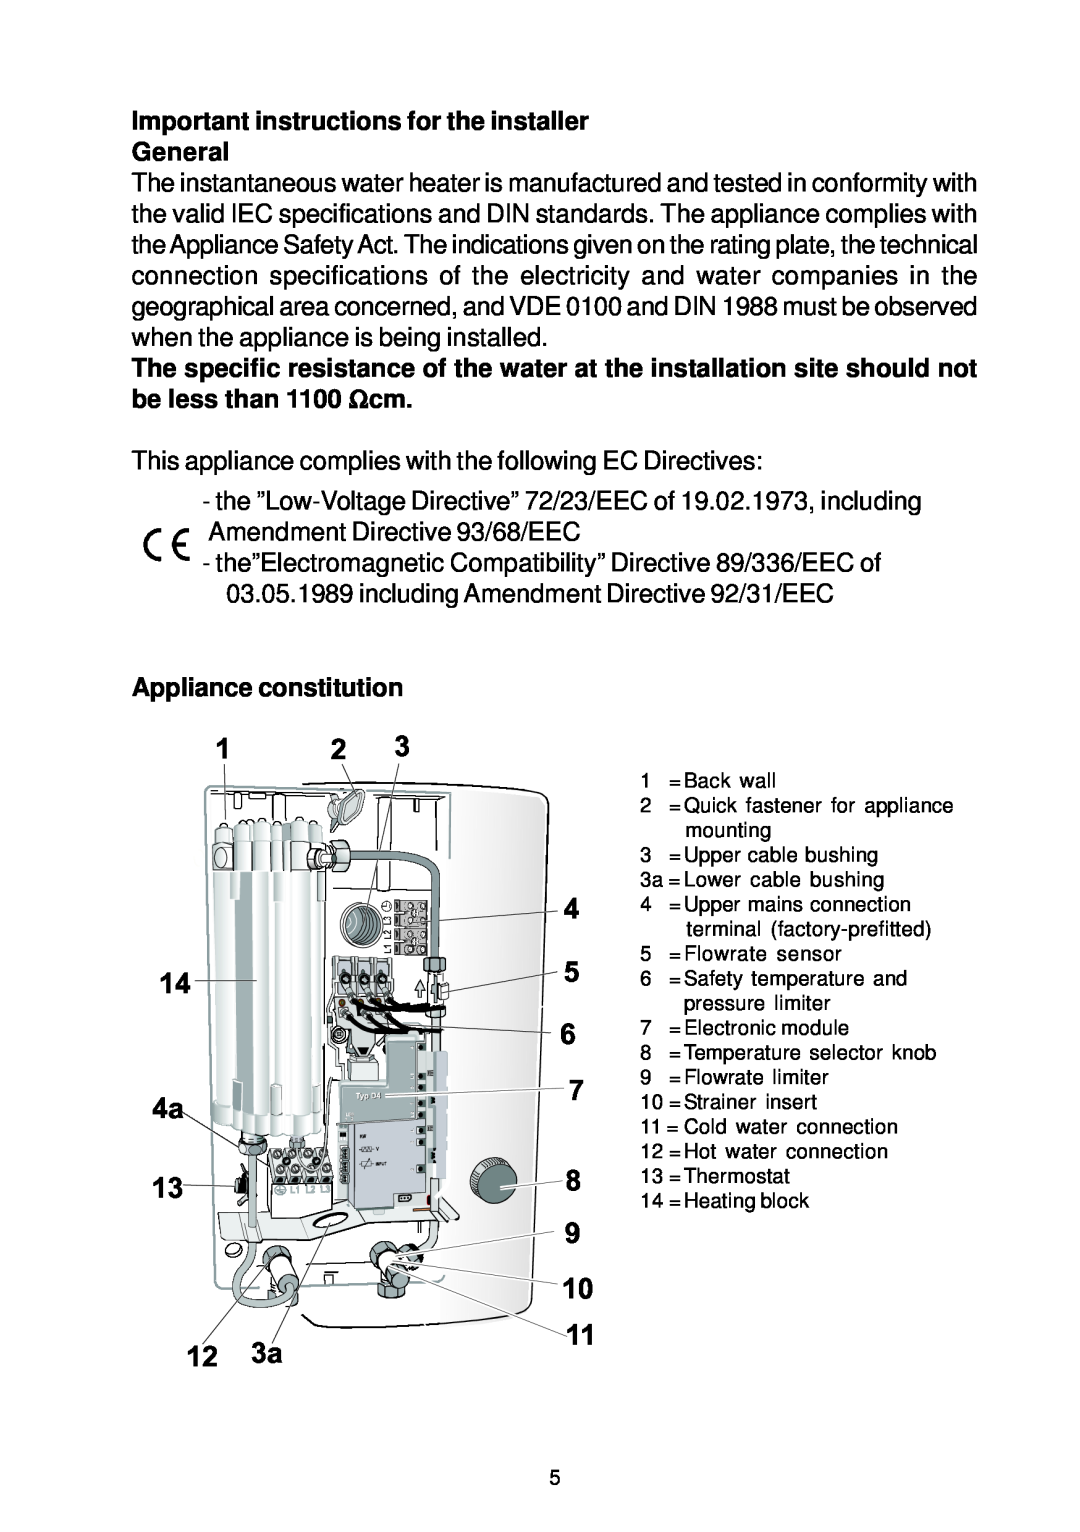 Electrolux IH21, IH24, IH 18 manual Important instructions for the installer General, Appliance constitution 